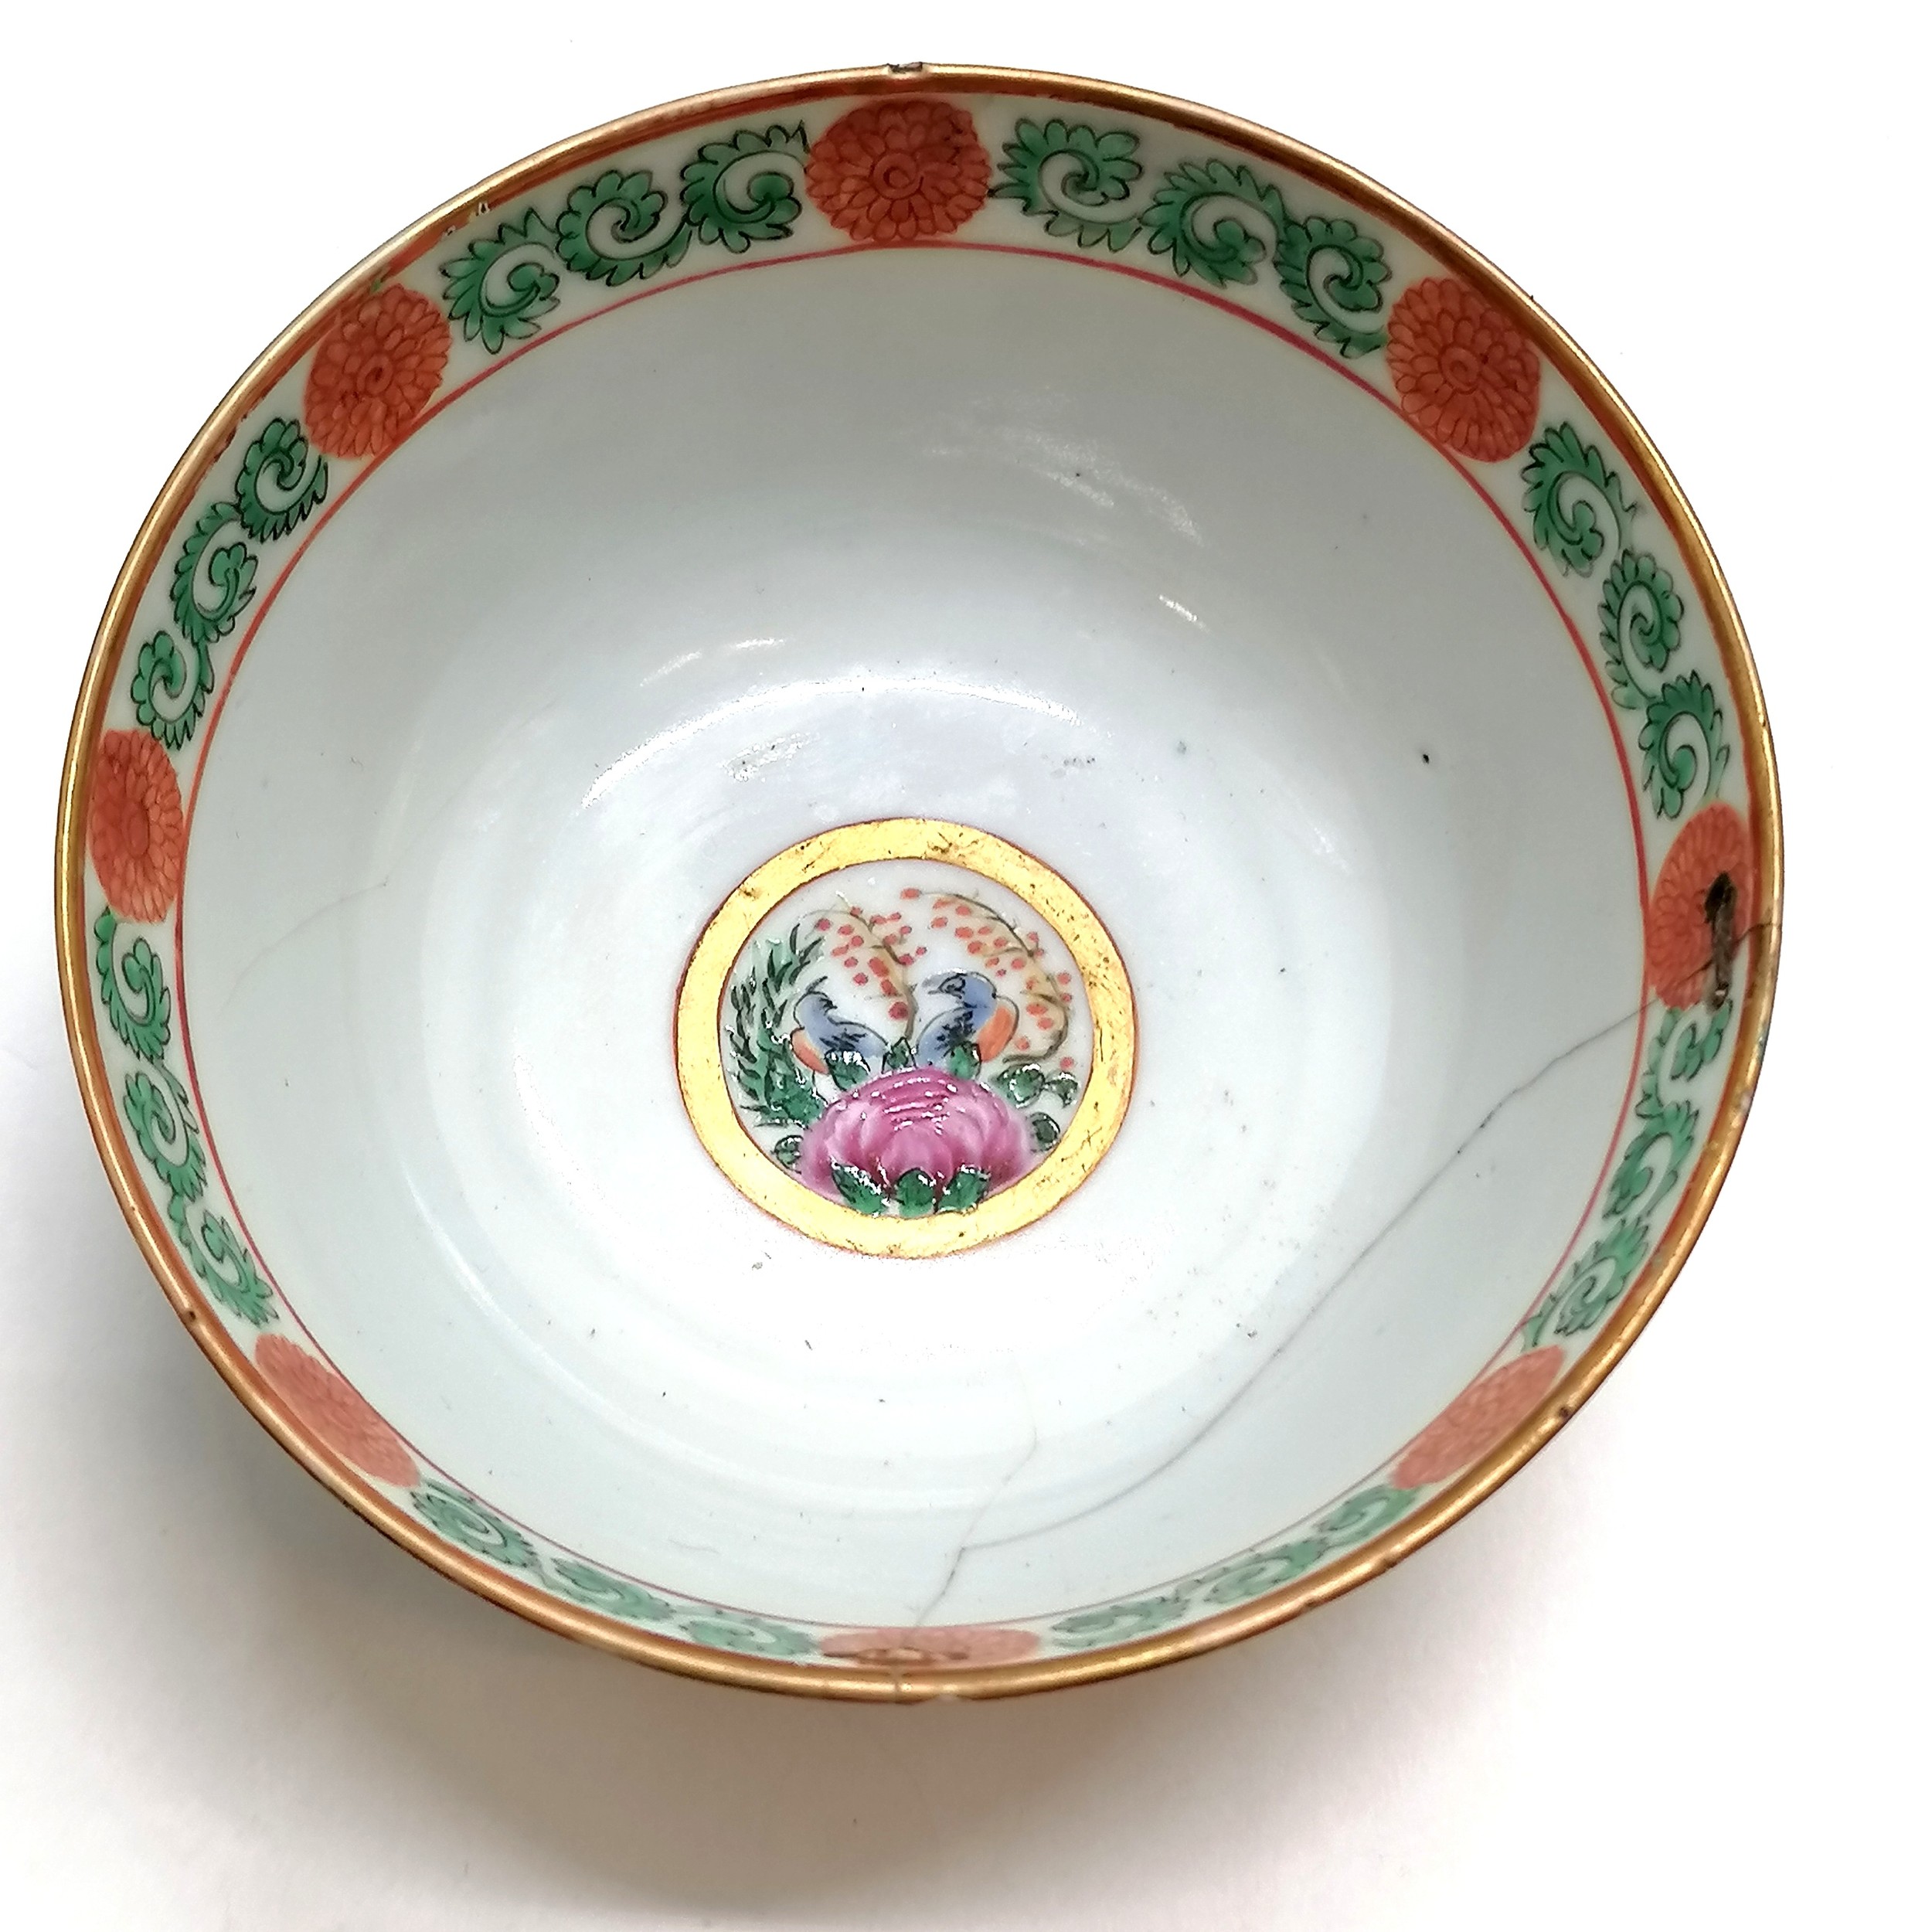 Antique Chinese famille rose bowl - yellow grounded with profuse floral & butterfly & bird (inc - Image 3 of 10